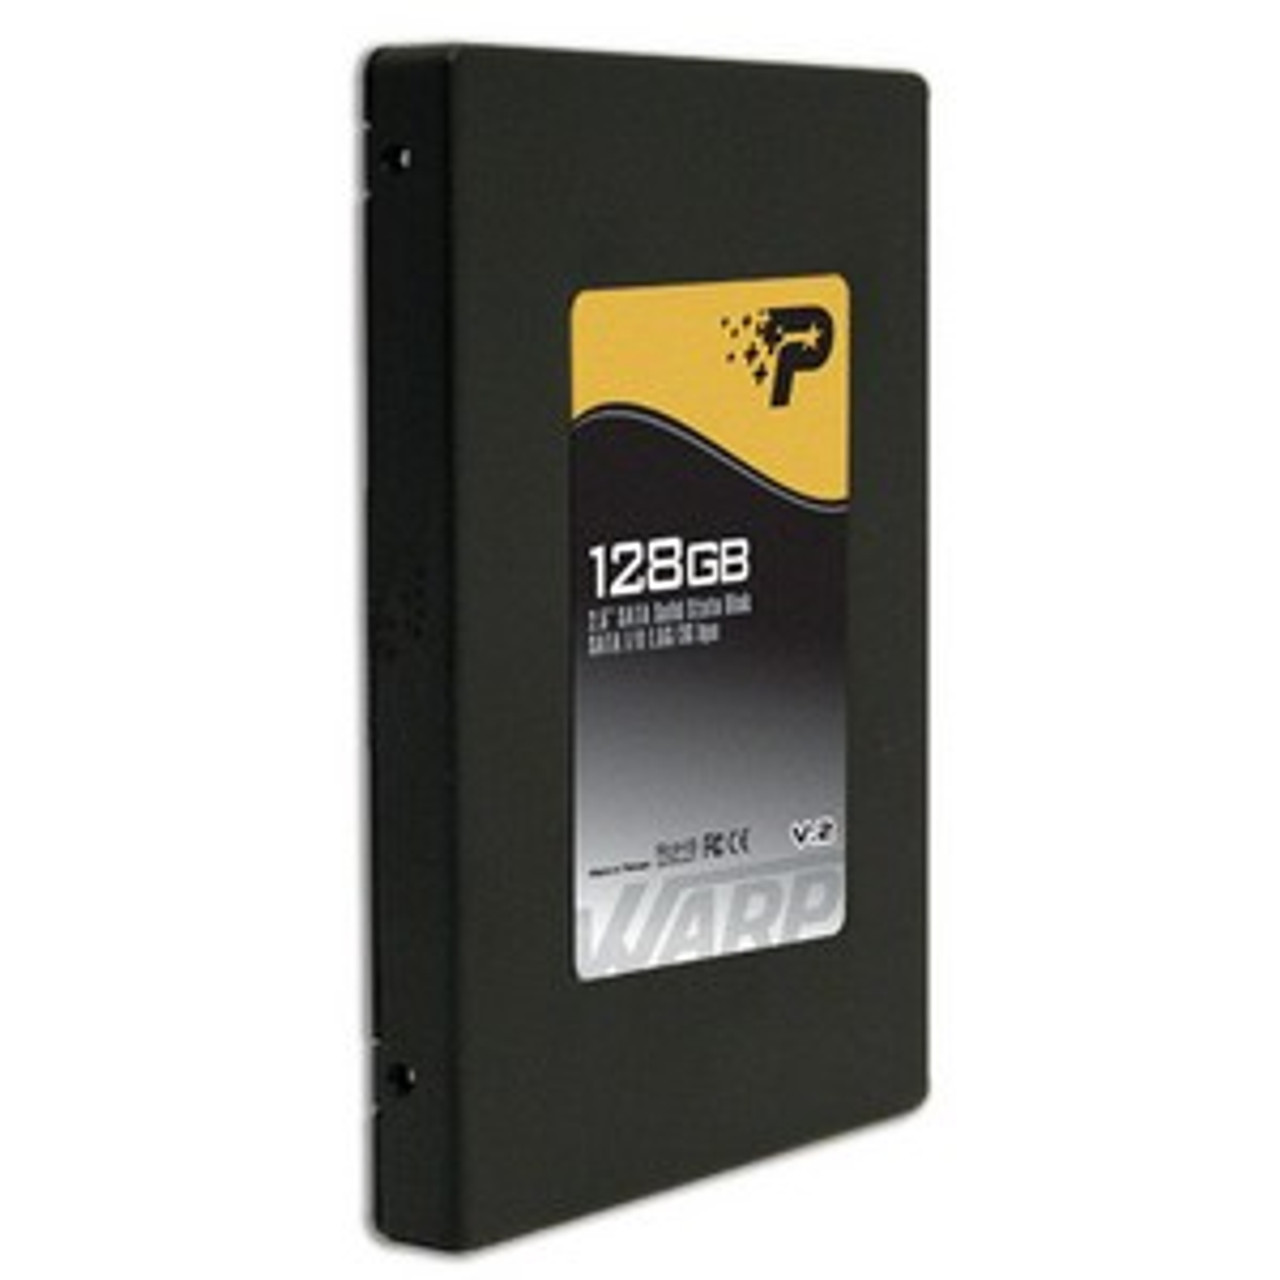 Part No:PE128GS25SSDR - Patriot Memory Warp PE128GS25SSDR 128 GB Internal Solid State Drive -  Pack - SATA/300 - Hot Swappable